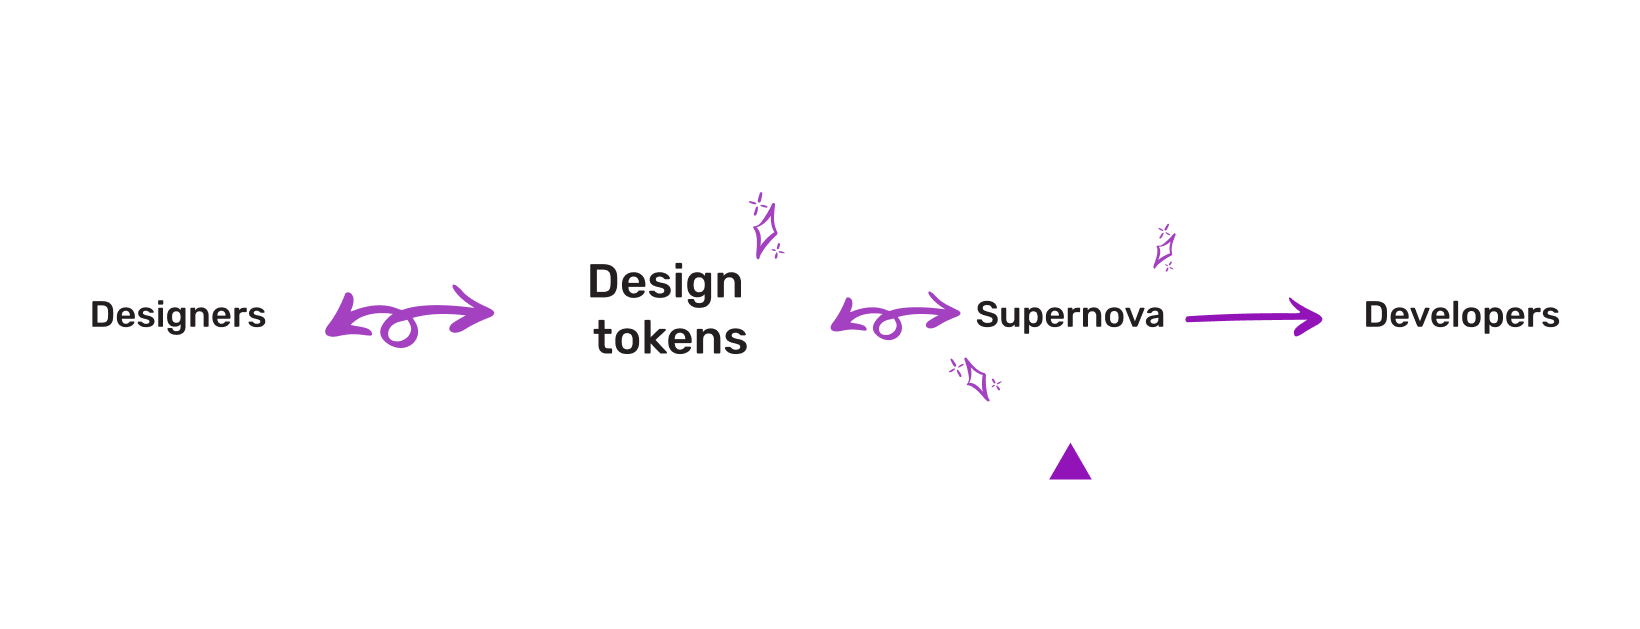 Schema: design tokens in the middle, linked bidirectionnaly to designers on the left.  It is now linked bidirectionnaly to Supernova on the right, which remains linked to developers on the far right.